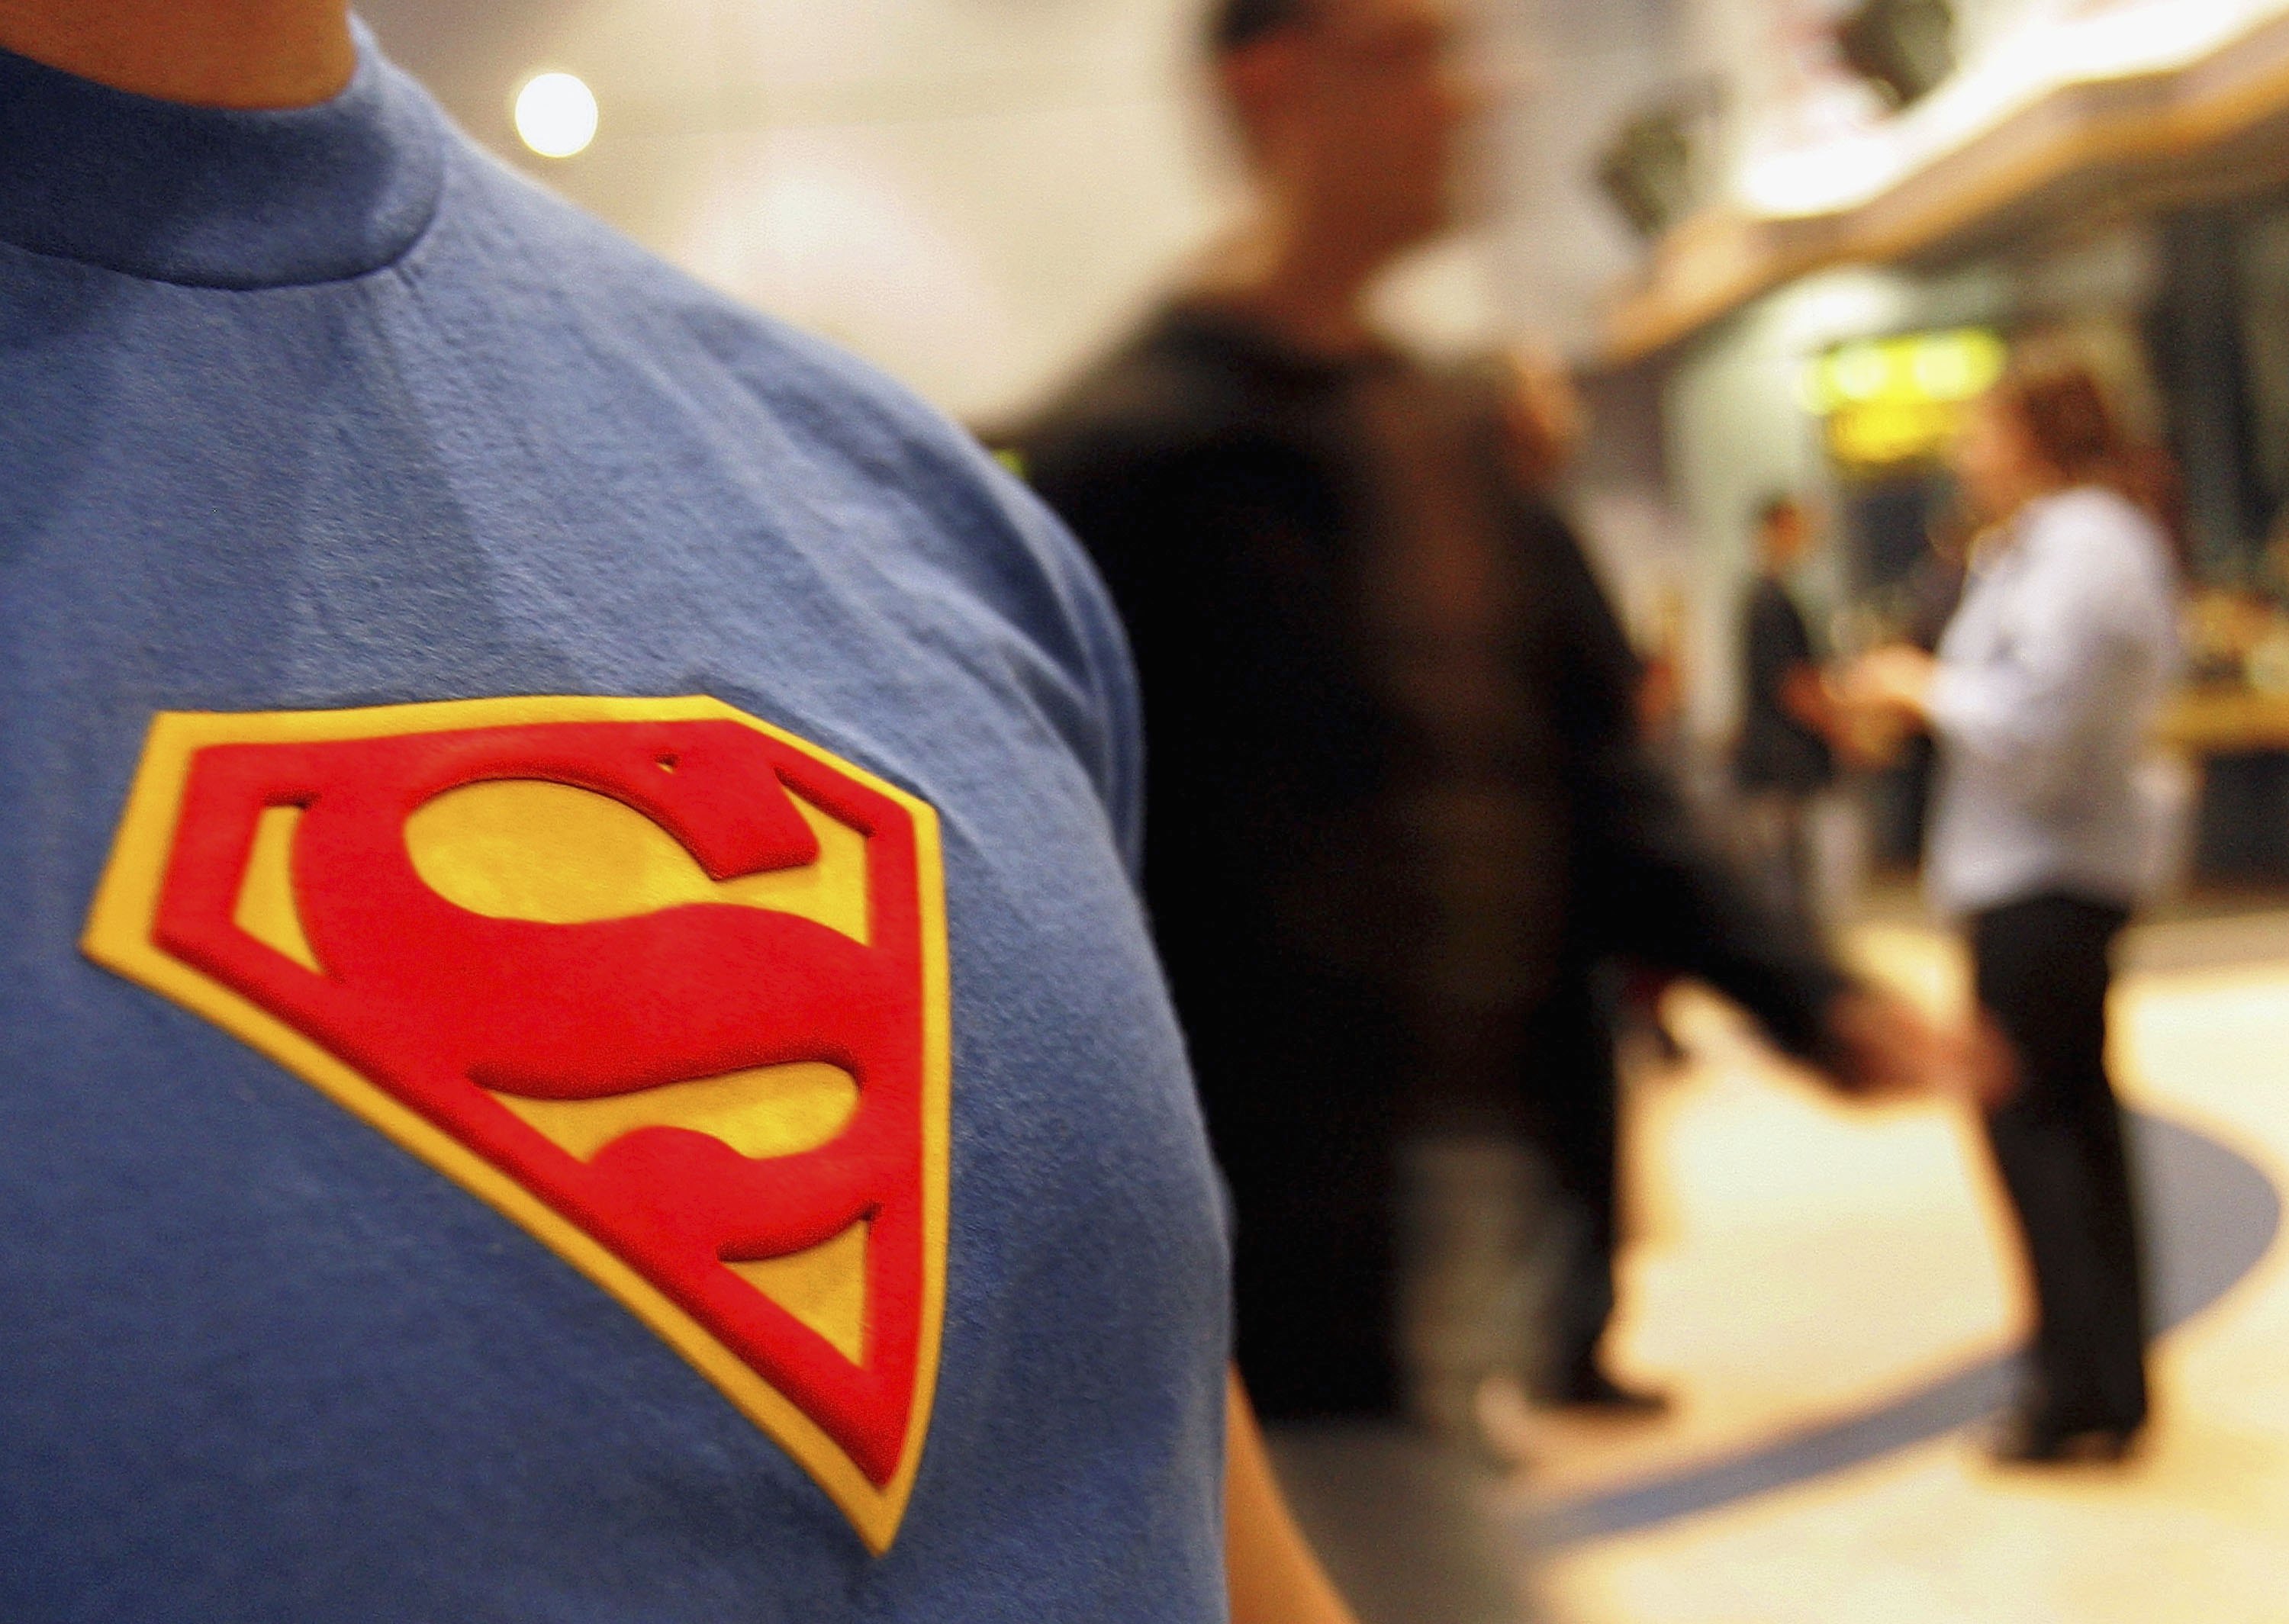 CHICAGO - JUNE 27: A moviegoer wearing his Superman tee-shirt is seen in the lobby prior to watching the new Superman Returns movie on June 27, 2006 in Chicago, Illinois. The theater had a special showing of the much anticipated new Superman movie at 10pm. (Photo by Tim Boyle/Getty Images) (Tim Boyle&mdash;Getty Images)